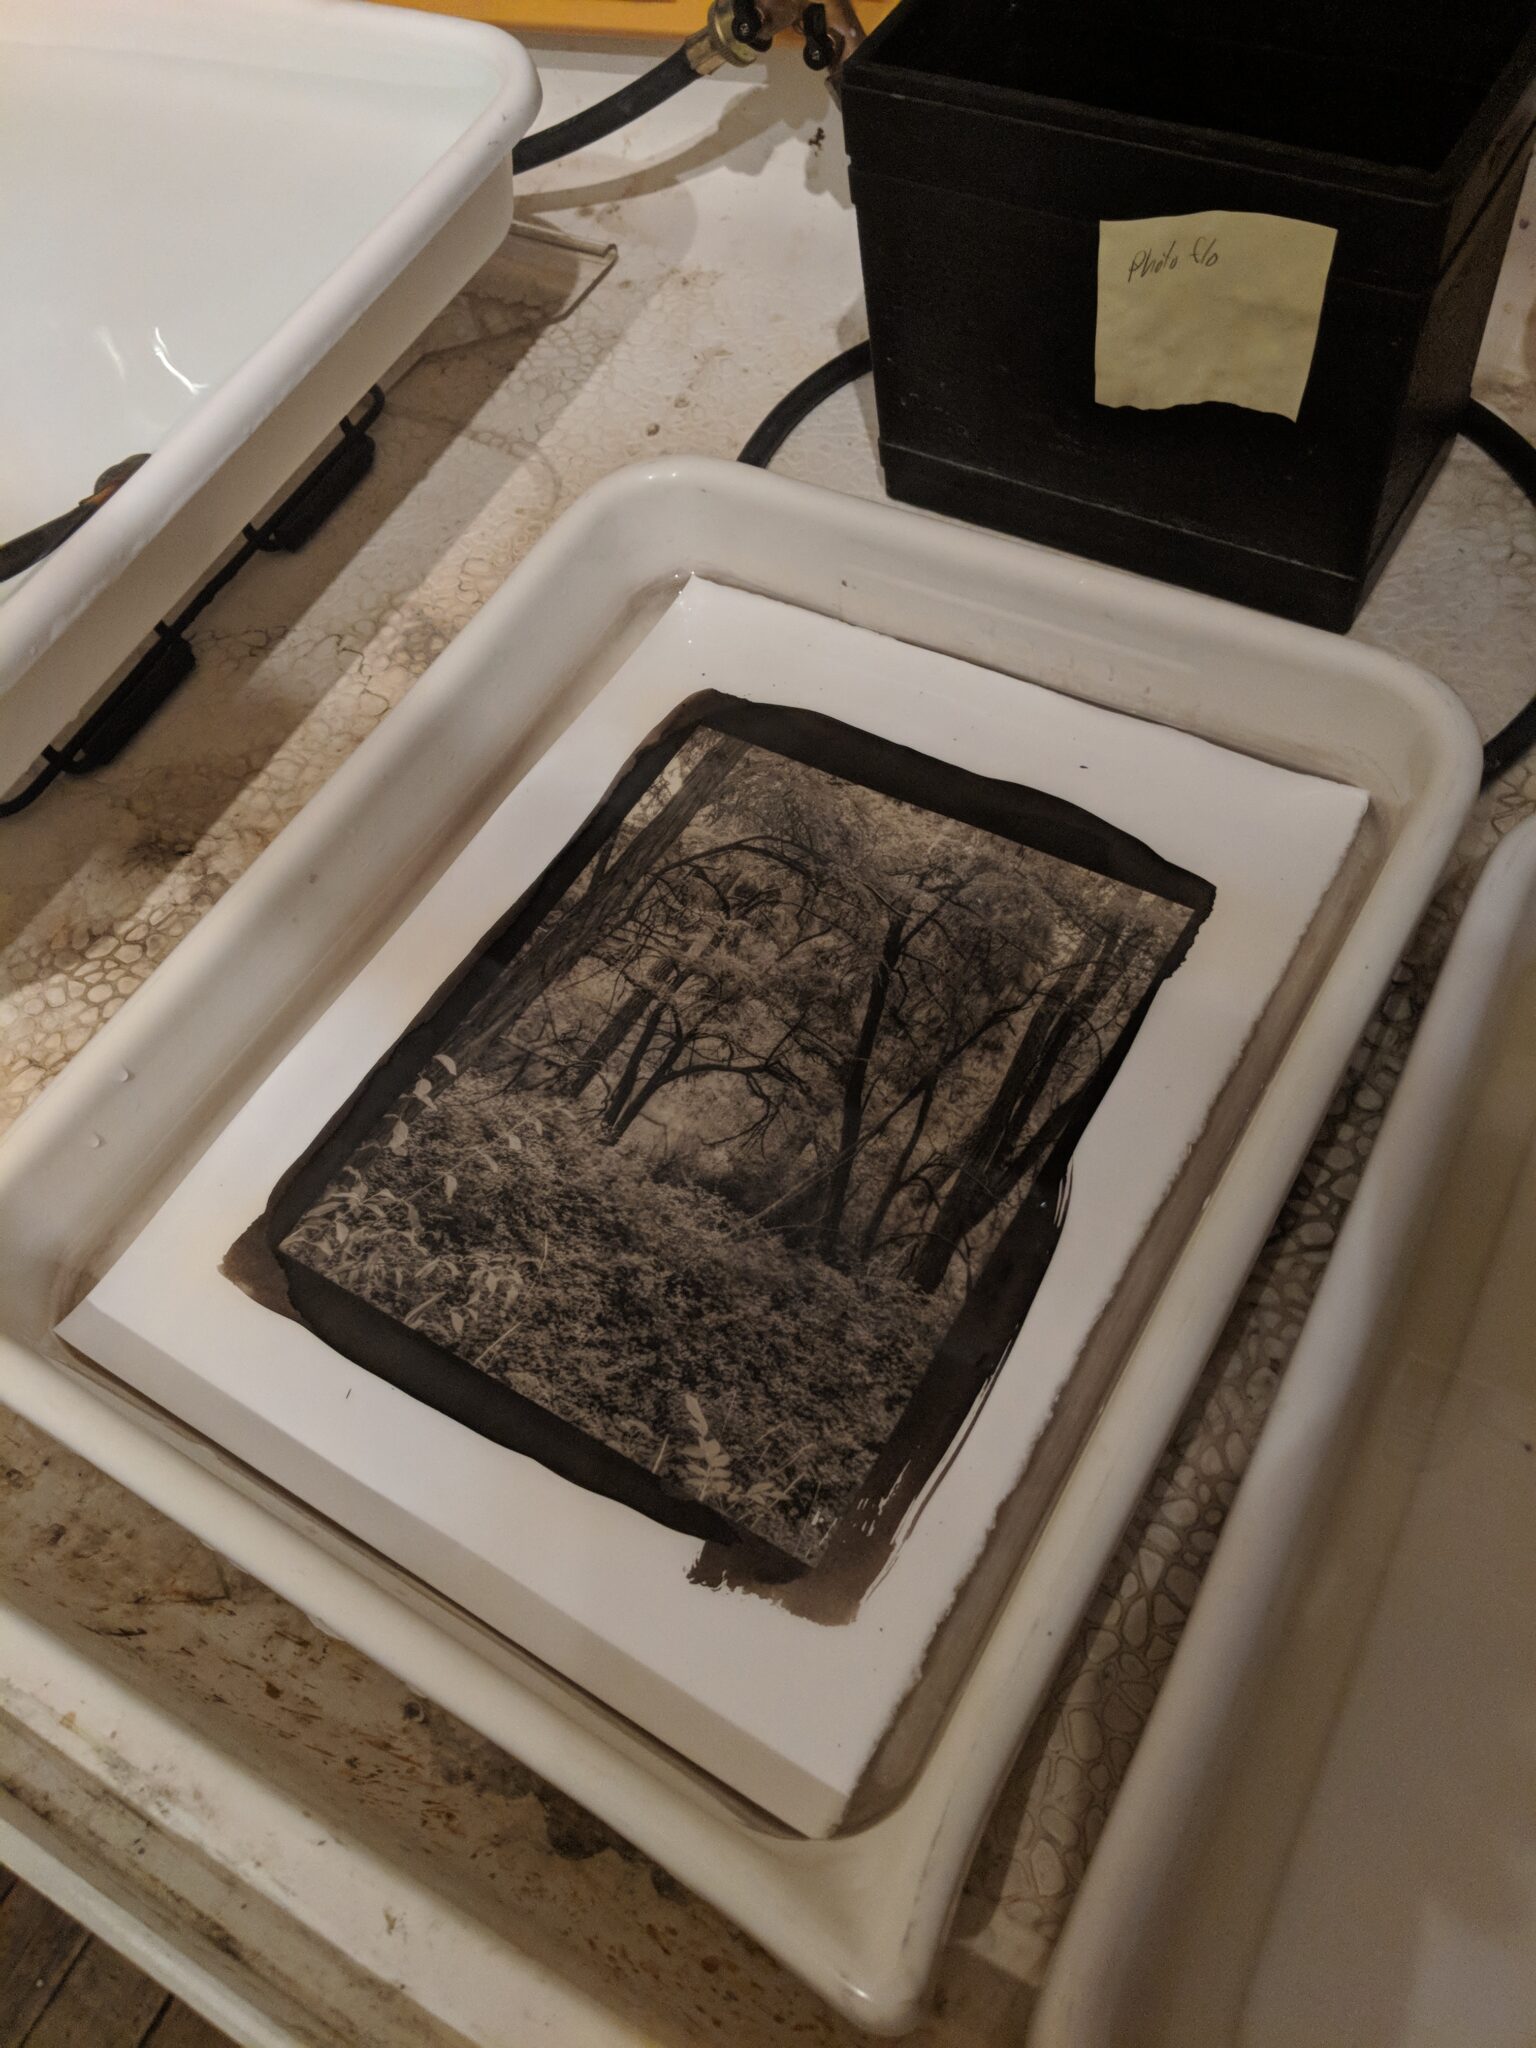 Photographs of platinum prints being made in the darkroom at the Richmond Art Collective.